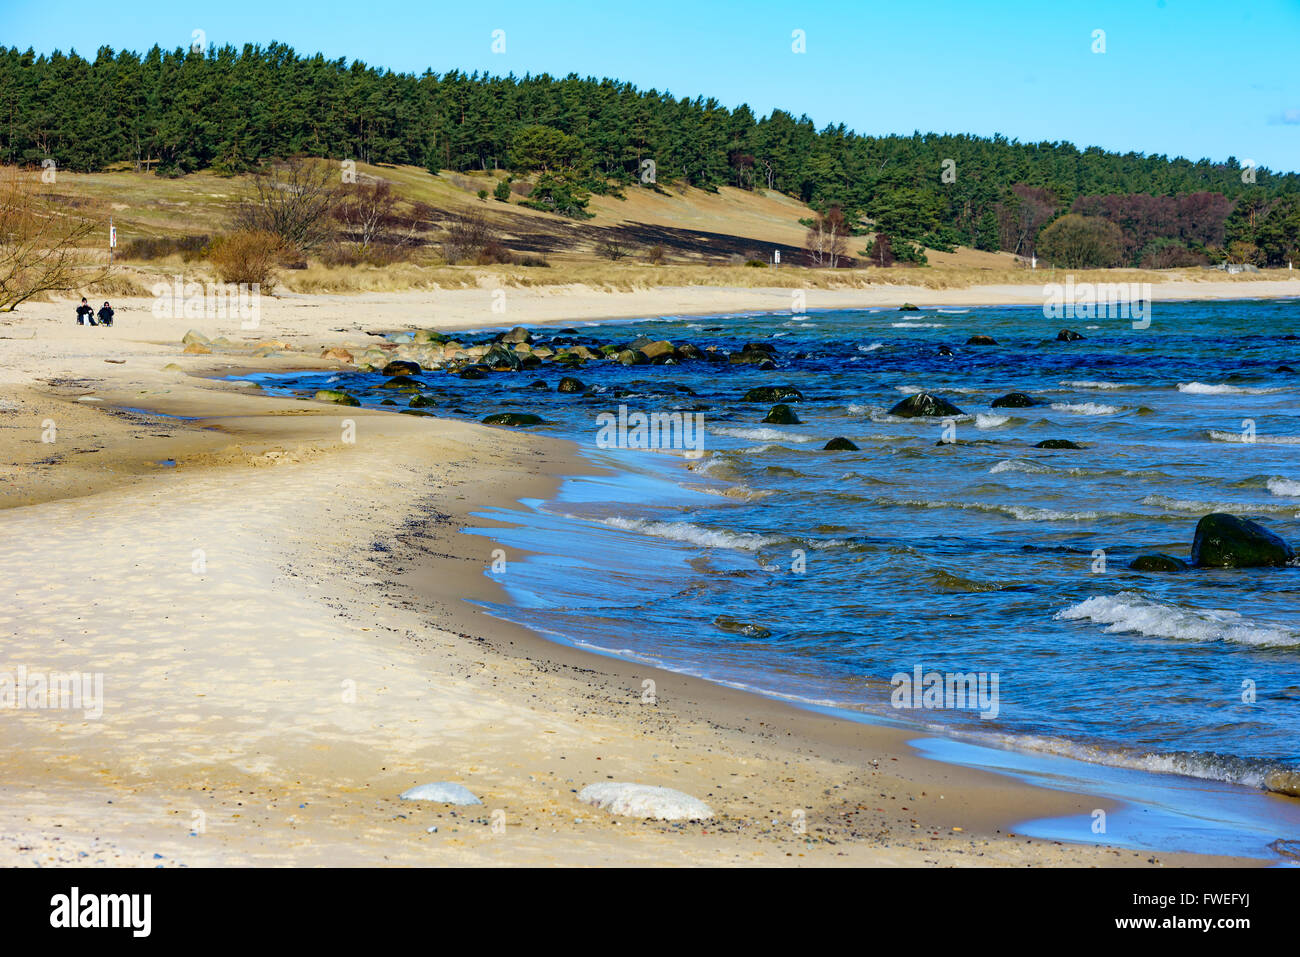 The breeze is whipping up some whites at the sea at the sandy stretch of coastline outside Kivik in Skane, Sweden. Two persons s Stock Photo